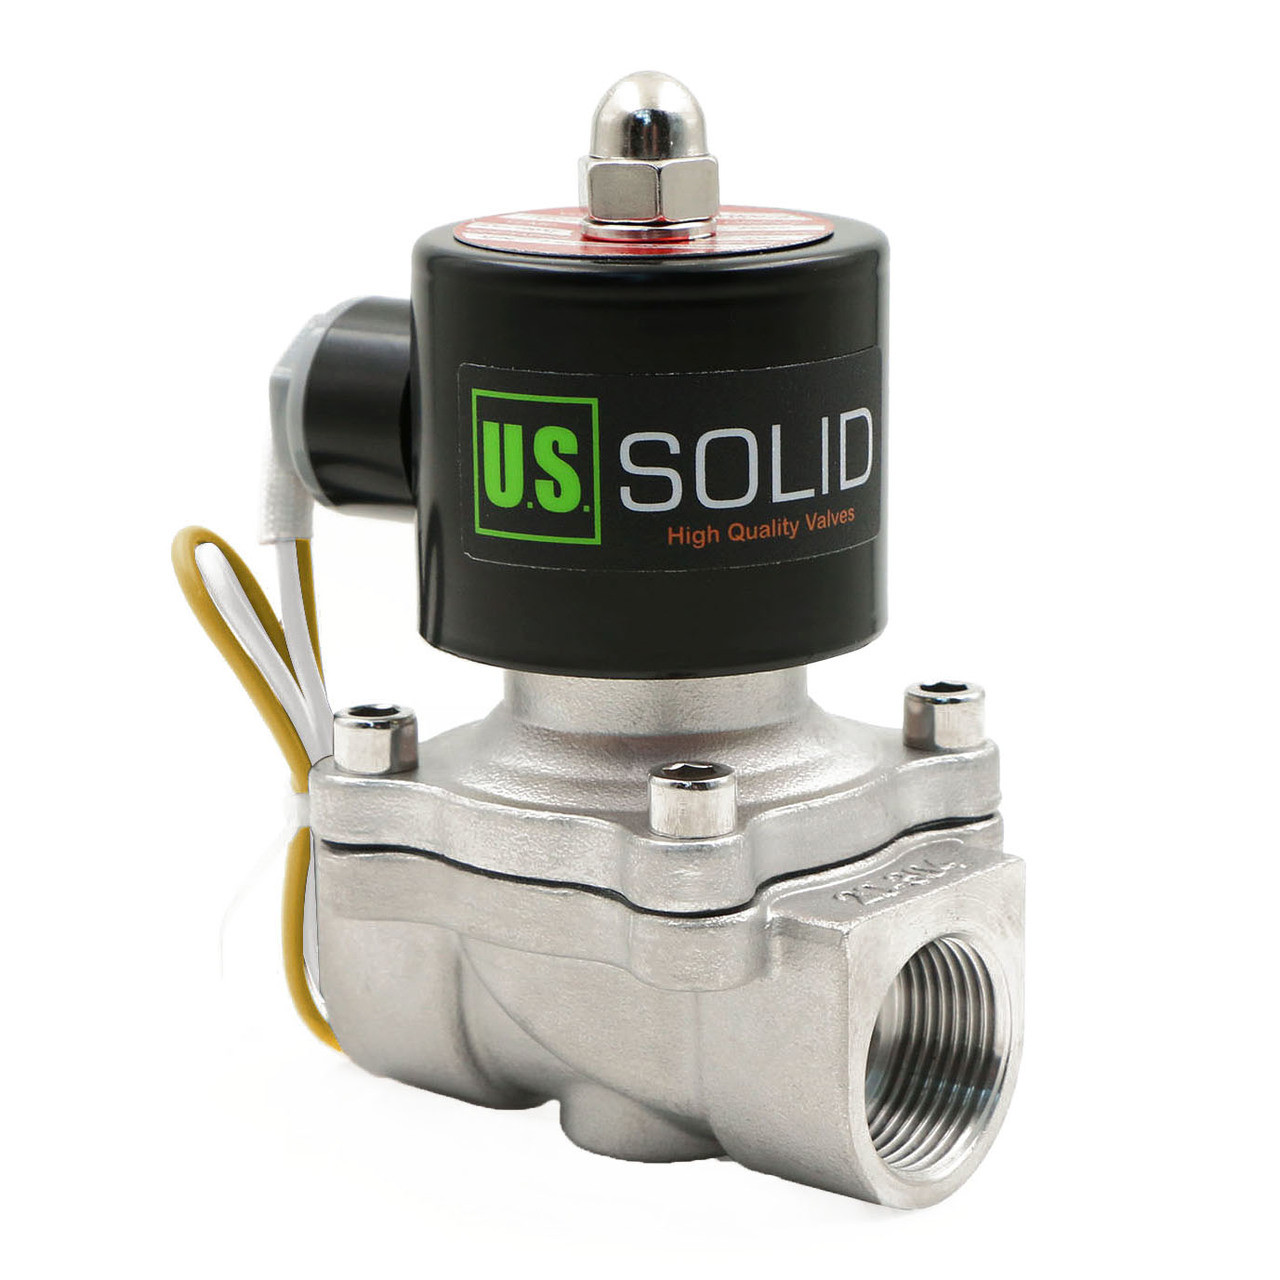 U.S. Solid Electric Solenoid Valve- 3/4" 110V AC Solenoid Valve Stainless Steel Body Normally Closed, VITON SEAL